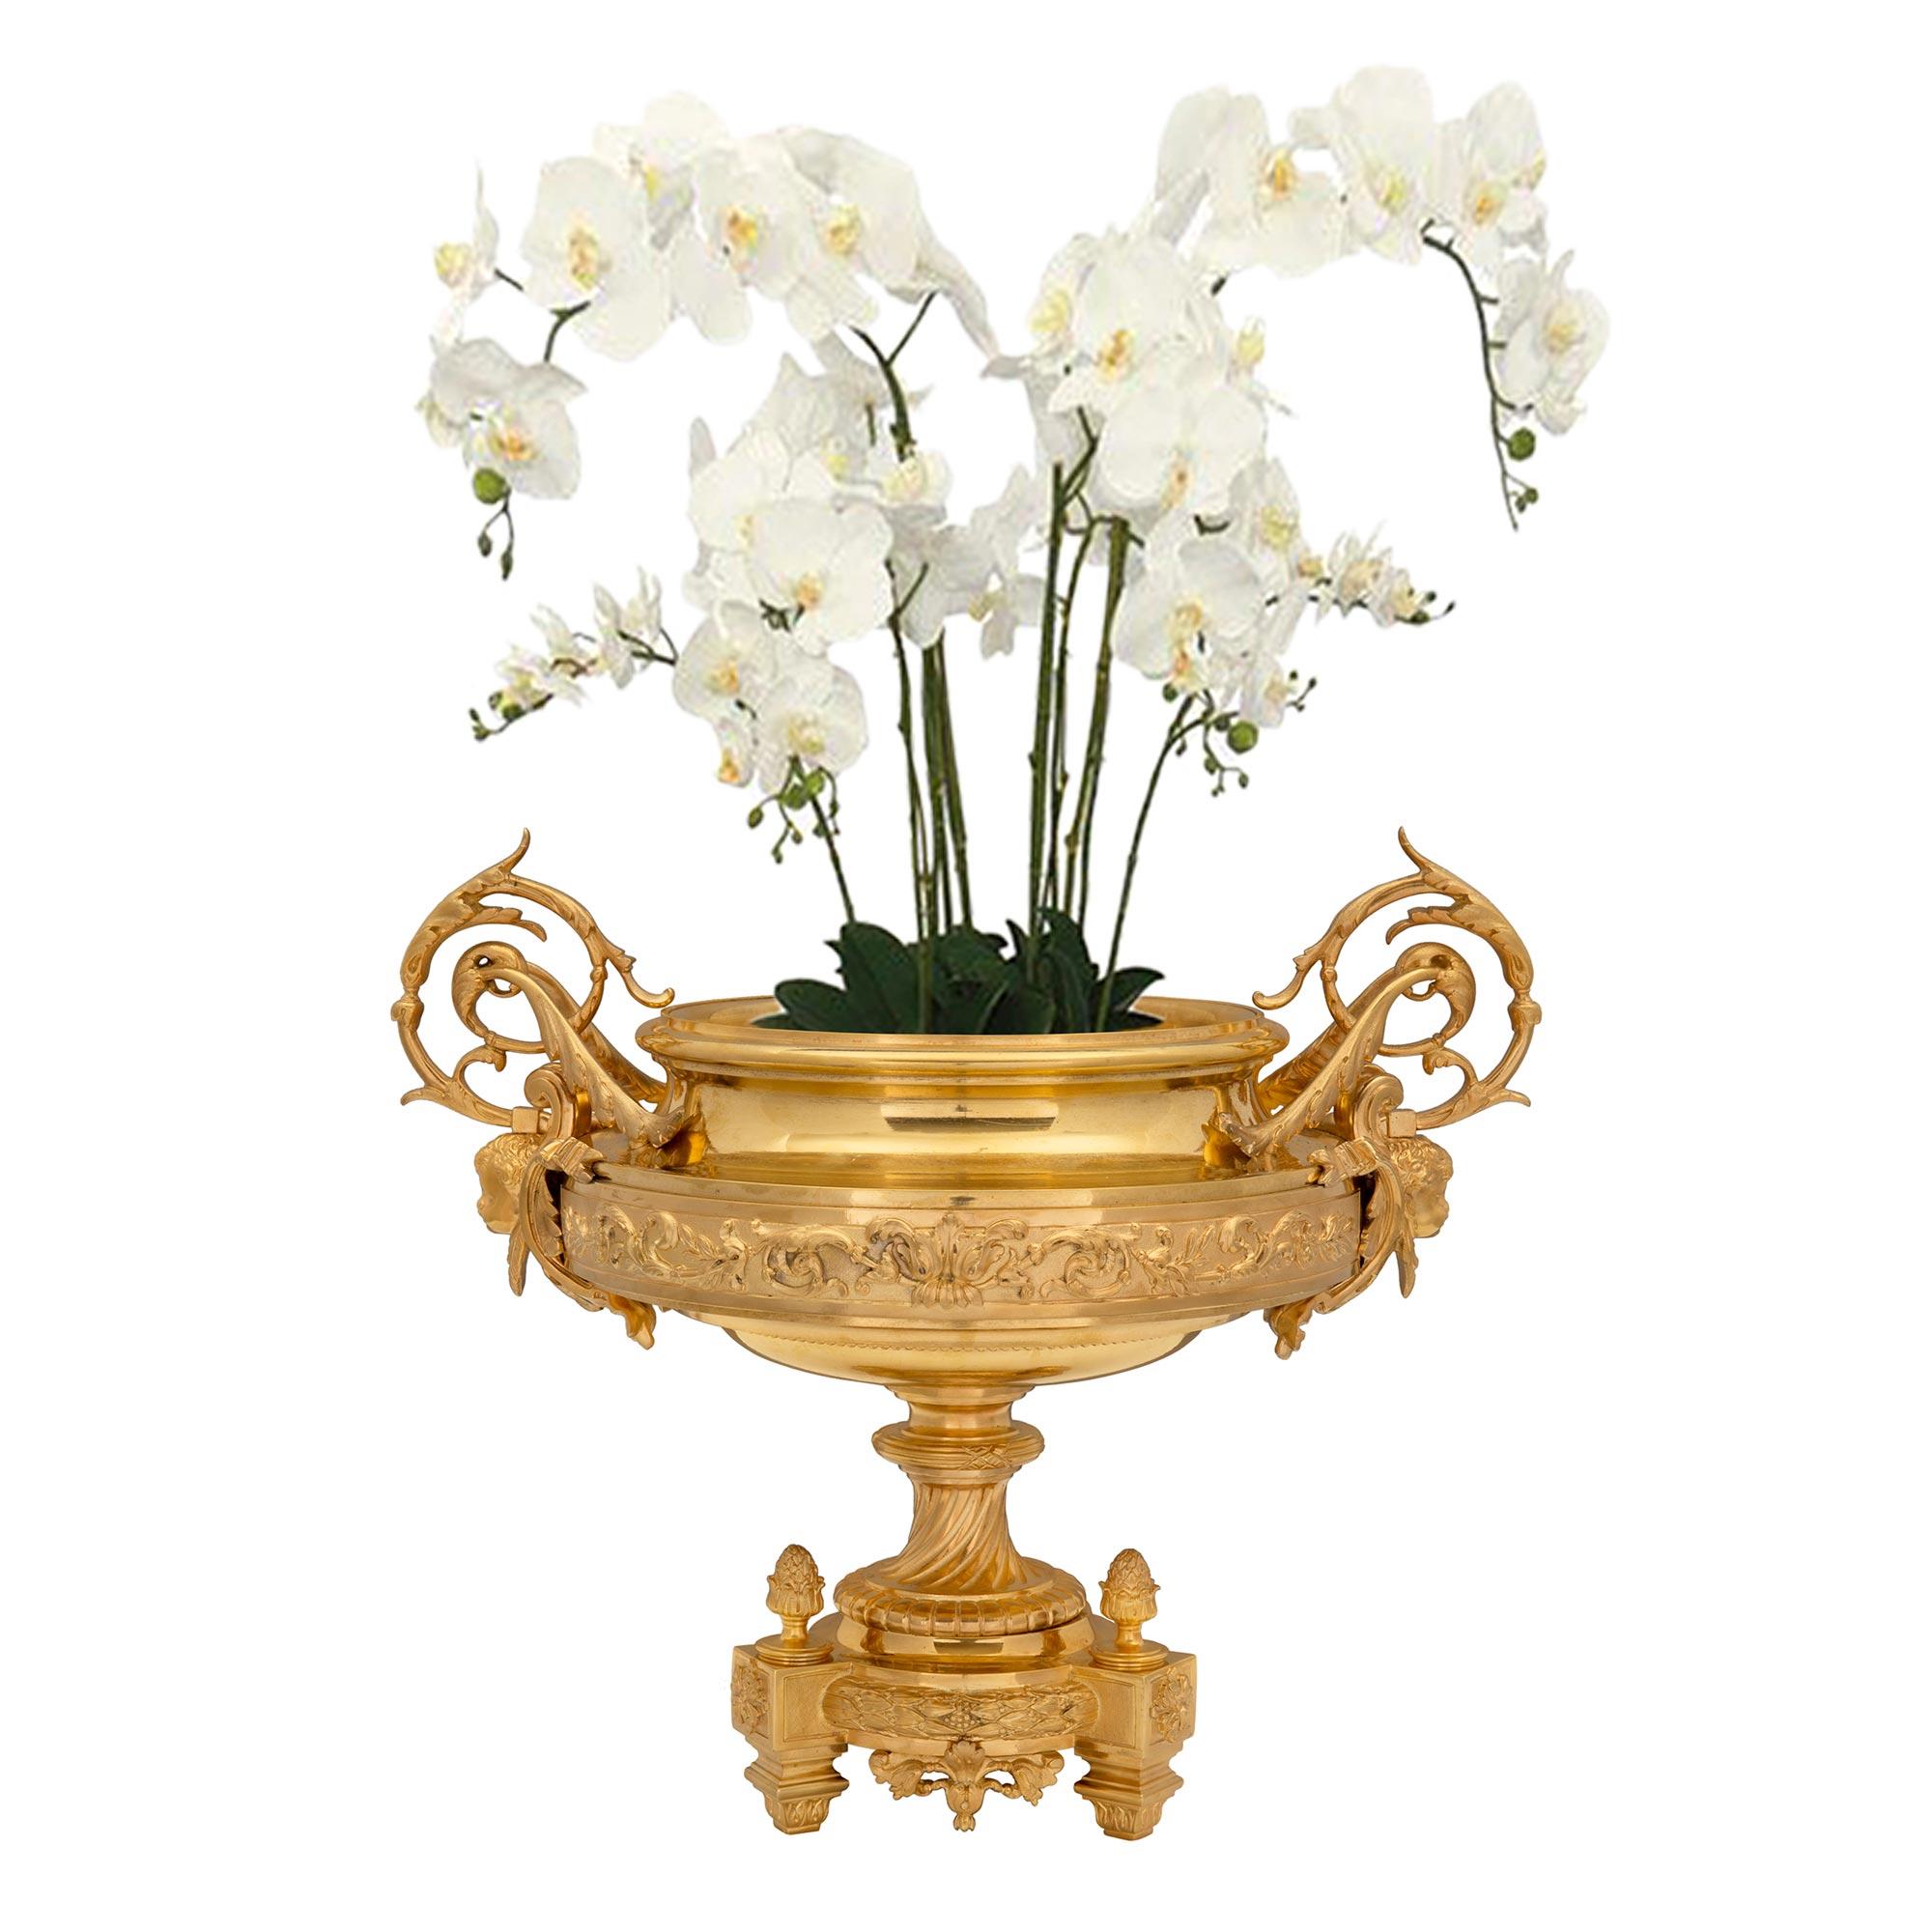 A most elegant and high quality French 19th century Louis XVI style ormolu centerpiece. The centerpiece is raised by square foliate feet below charming block rosettes and beautiful acorn finials flanked by fine foliate movements. A detailed berried